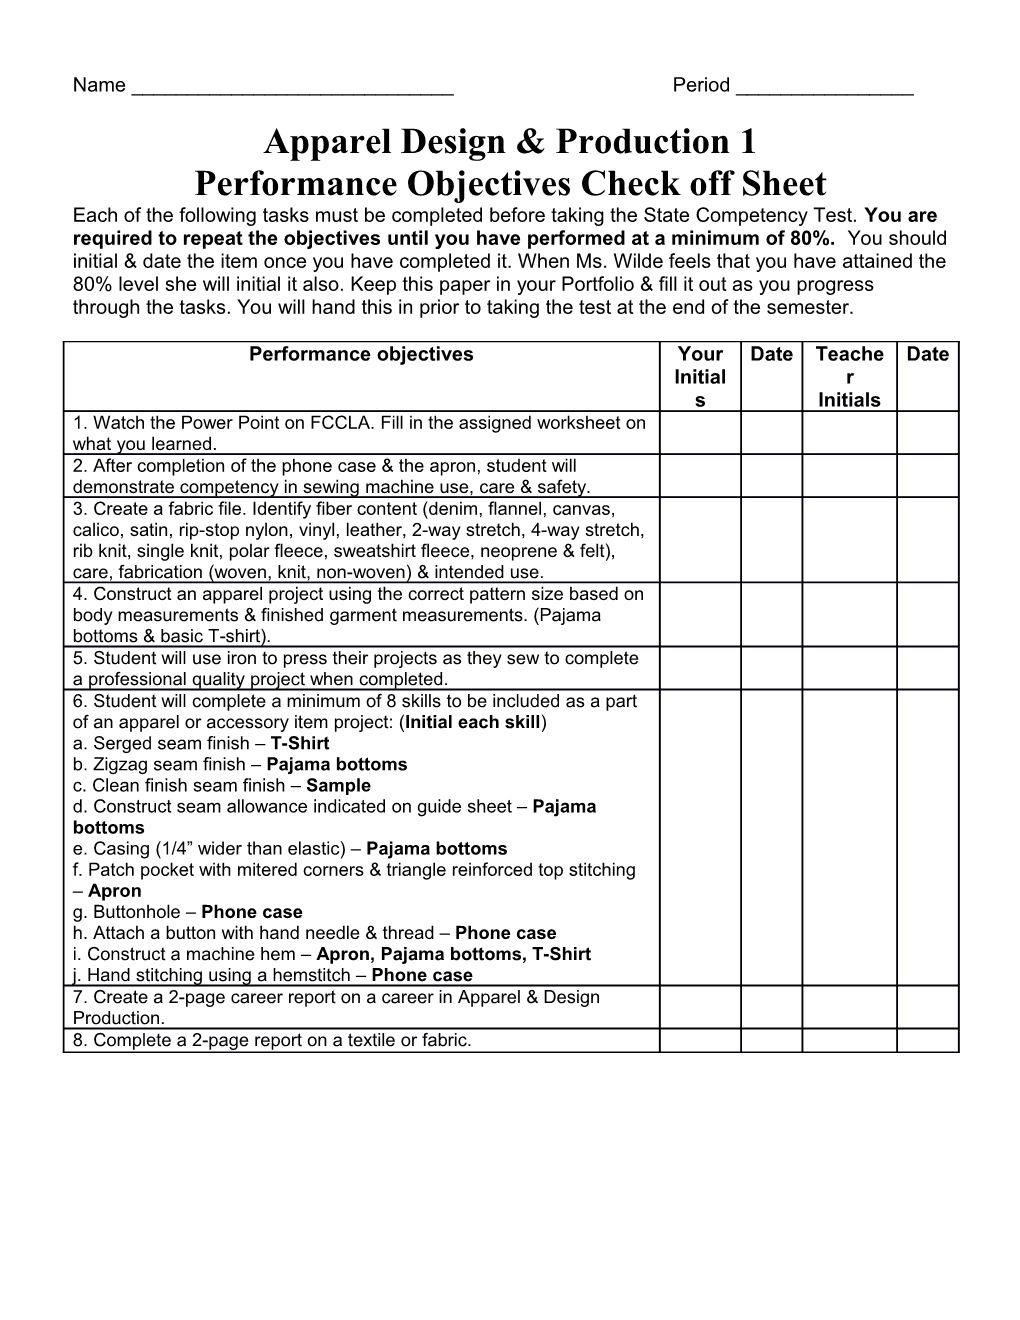 Performance Objectives Check Off Sheet s1